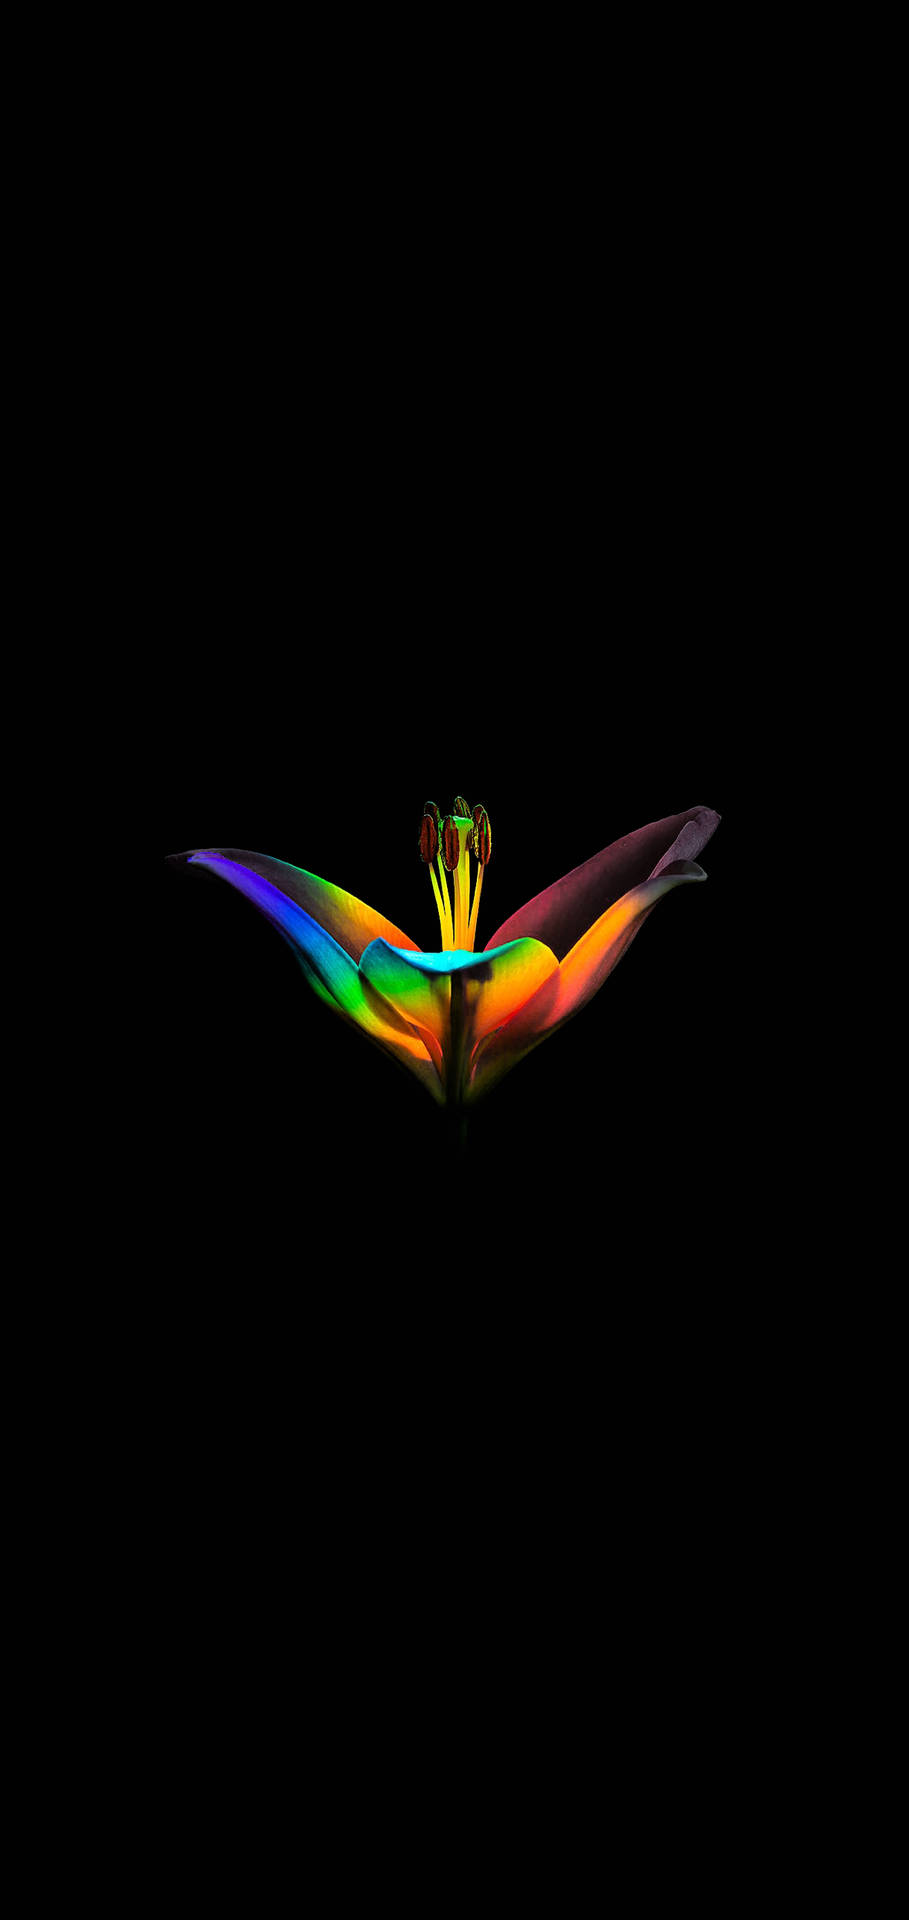 Experience vivid, colorful visuals on an AMOLED display. Wallpaper